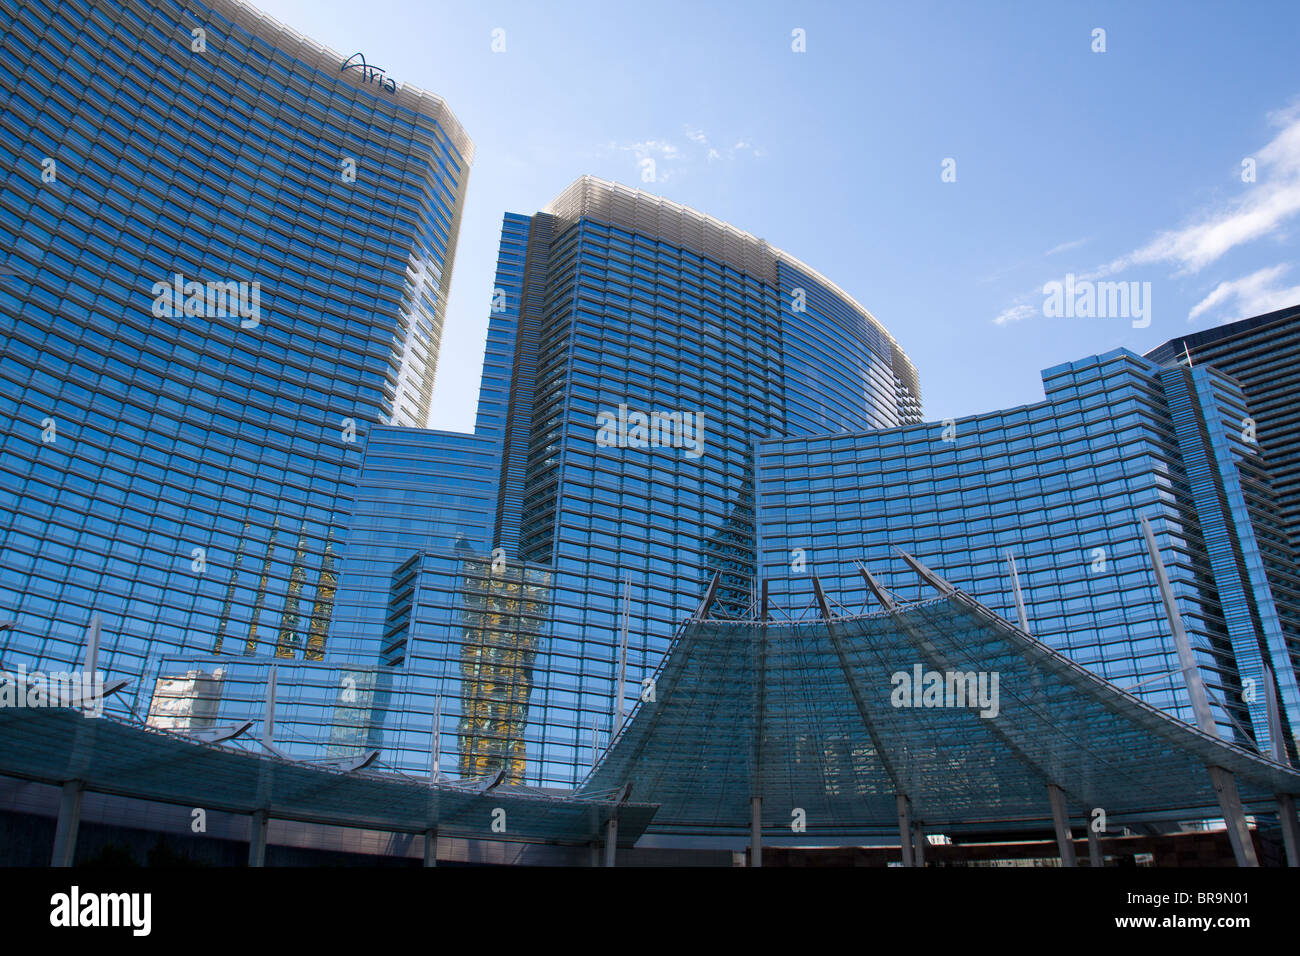 Modern curved glass and steel entrance to the Aria Hotel and Casino in Las Vegas, Nevada, USA Stock Photo